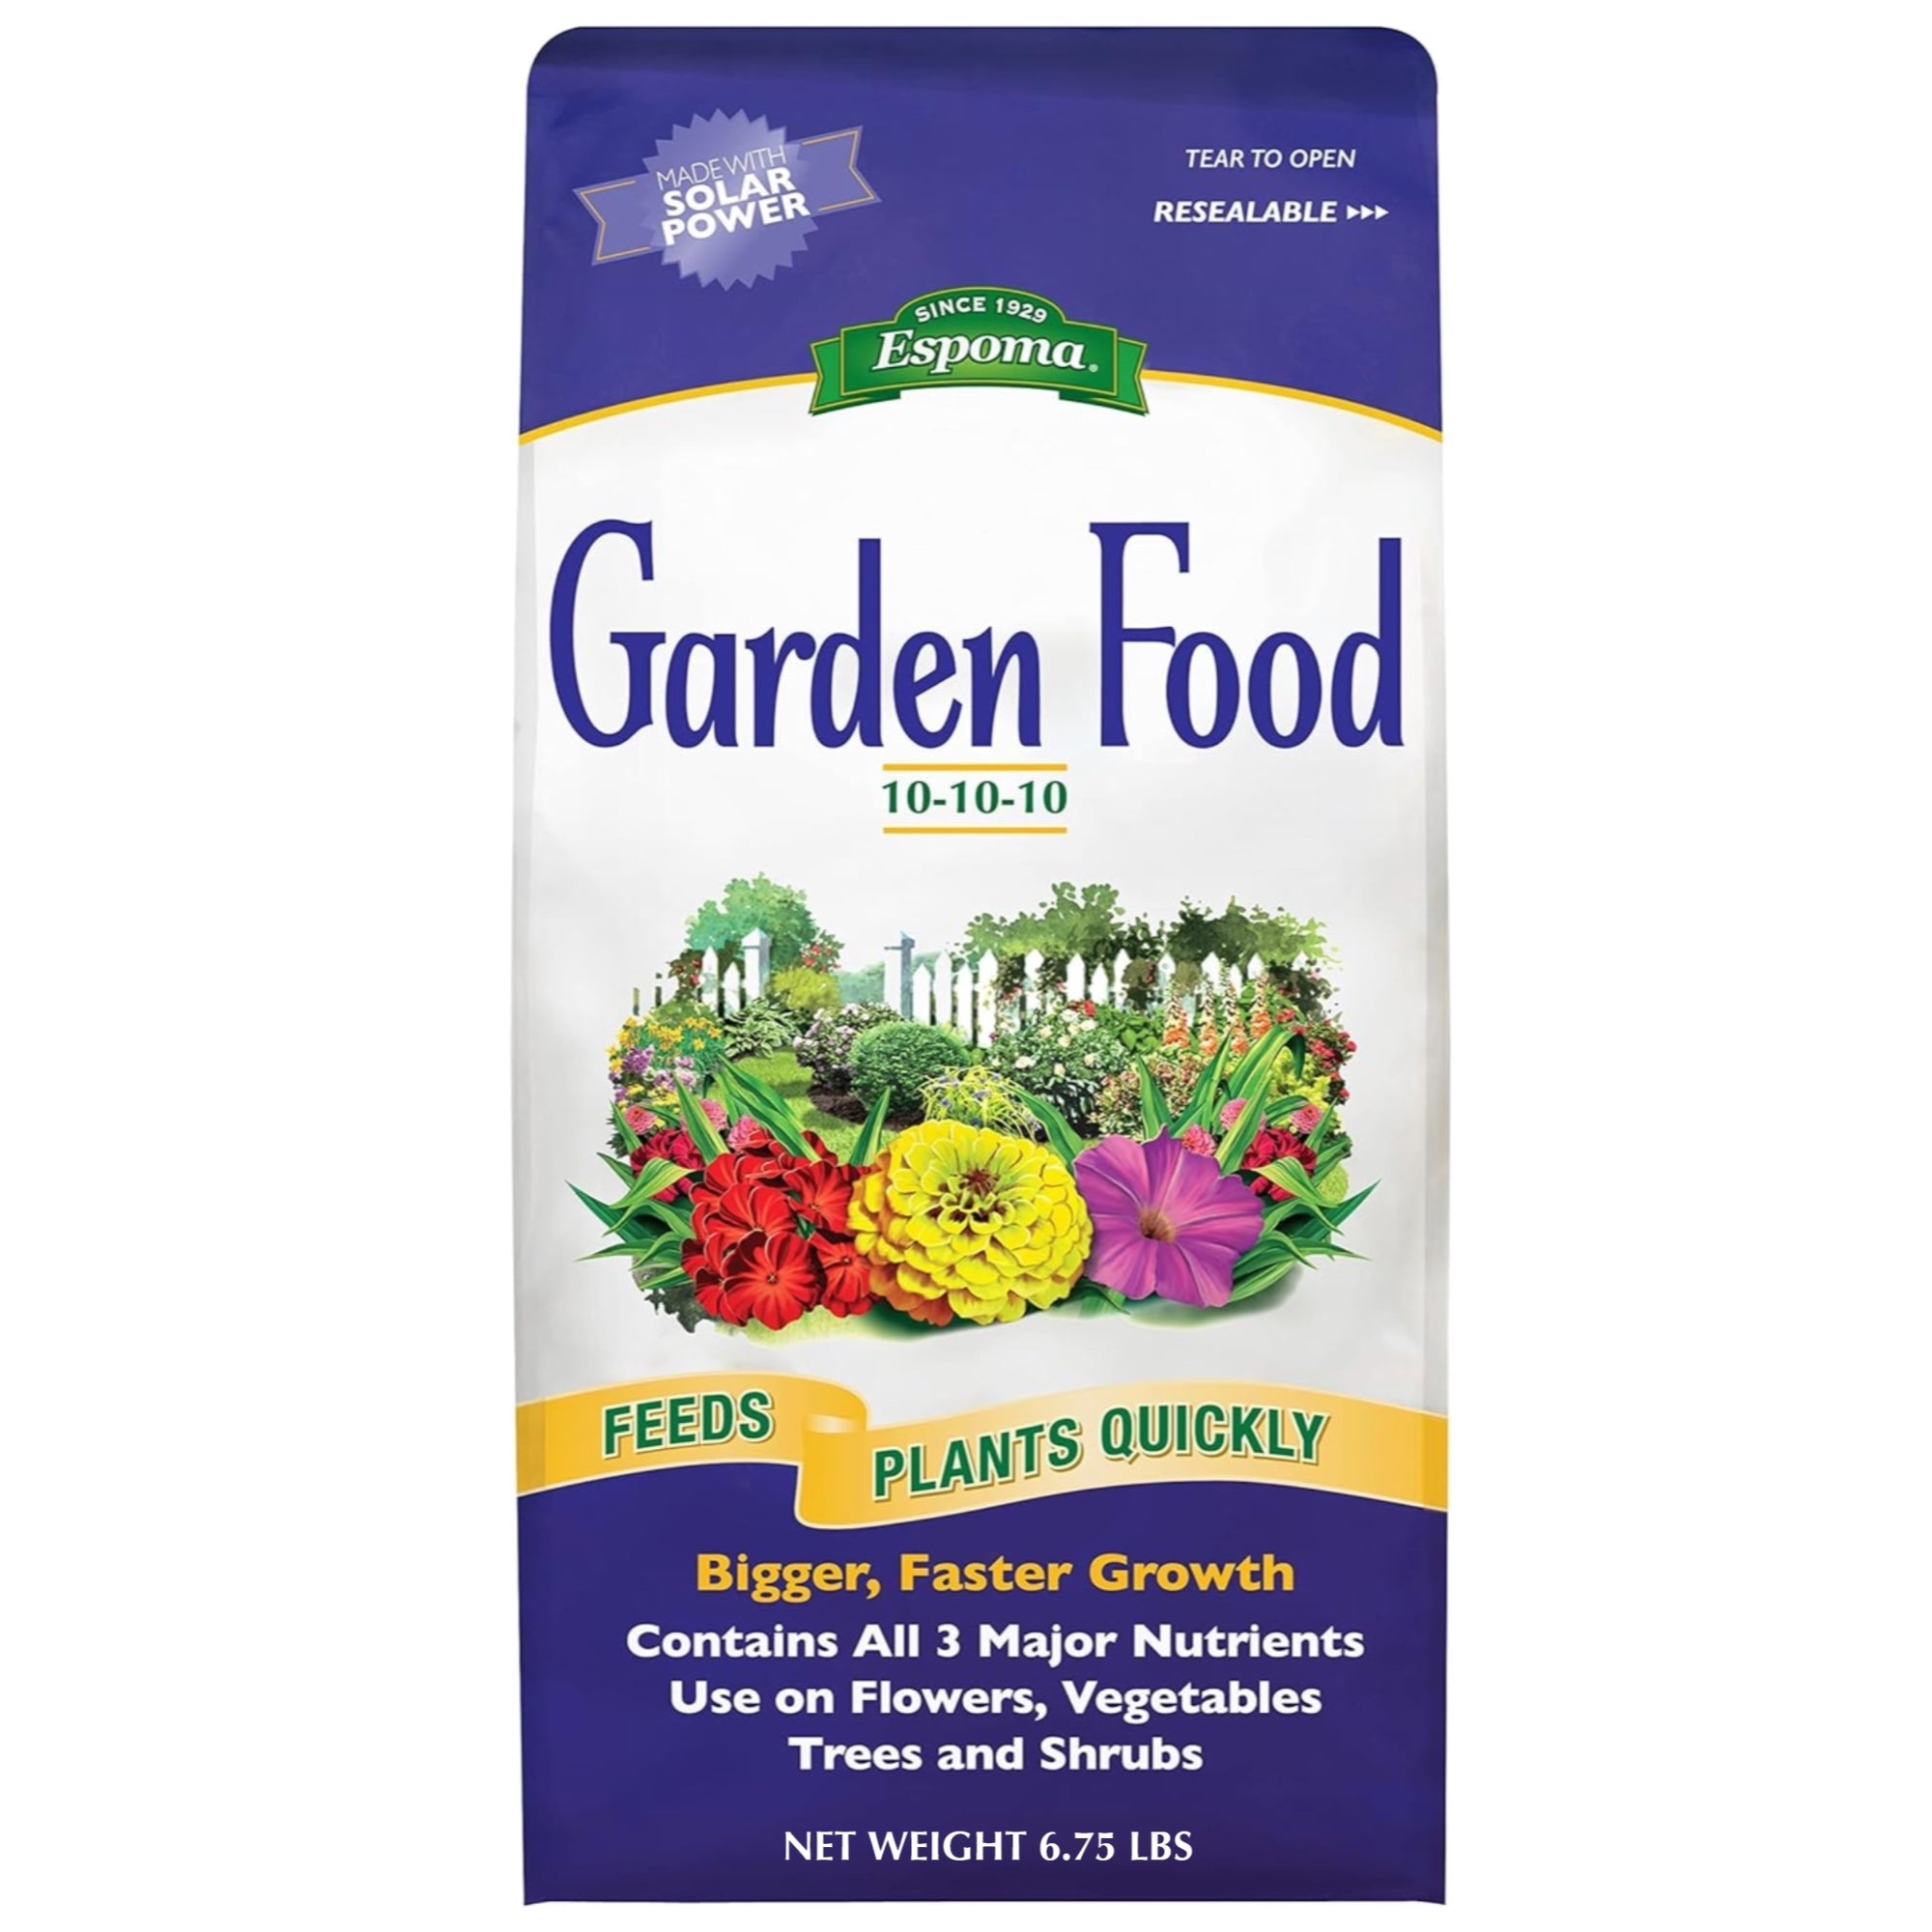 Espoma Garden Food 10-10-10 General Purpose Plant Food, Feeds Plants Quickly for Bigger and Faster Growth, 6.75 lb Bag